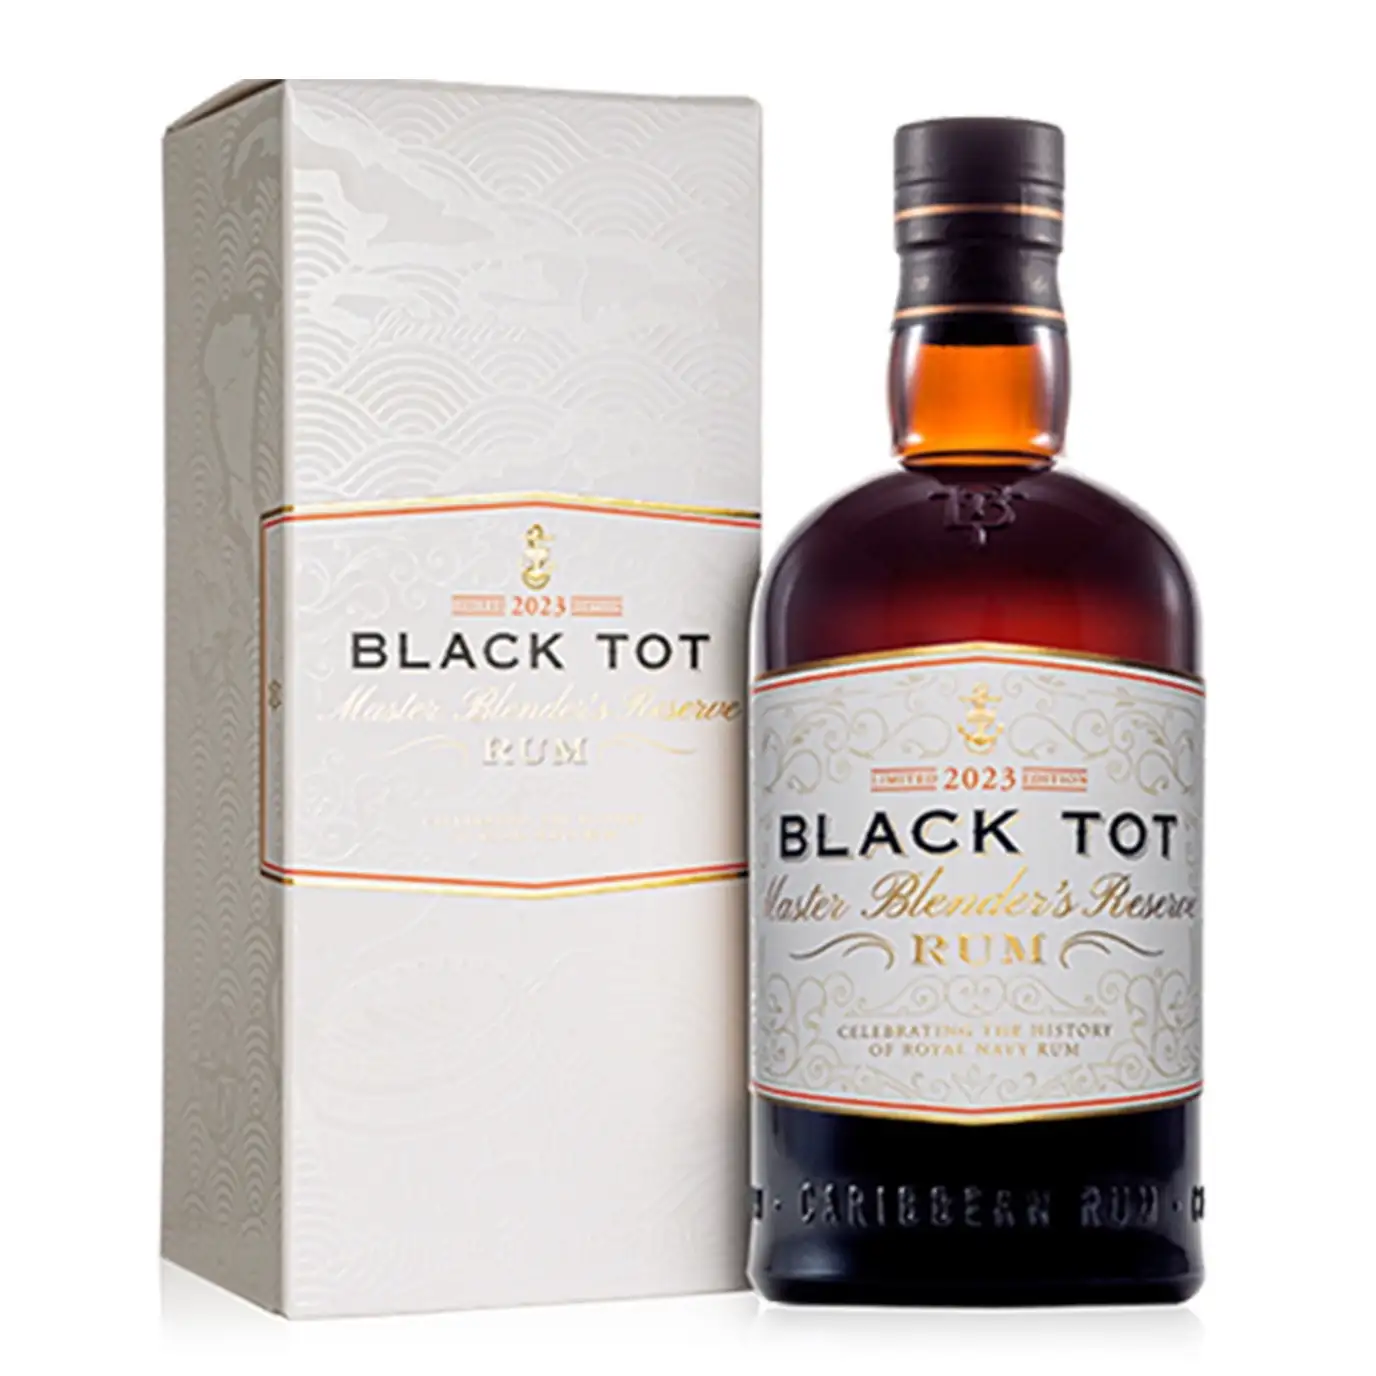 Image of the front of the bottle of the rum Black Tot Rum Master Blender’s Reserve 2023